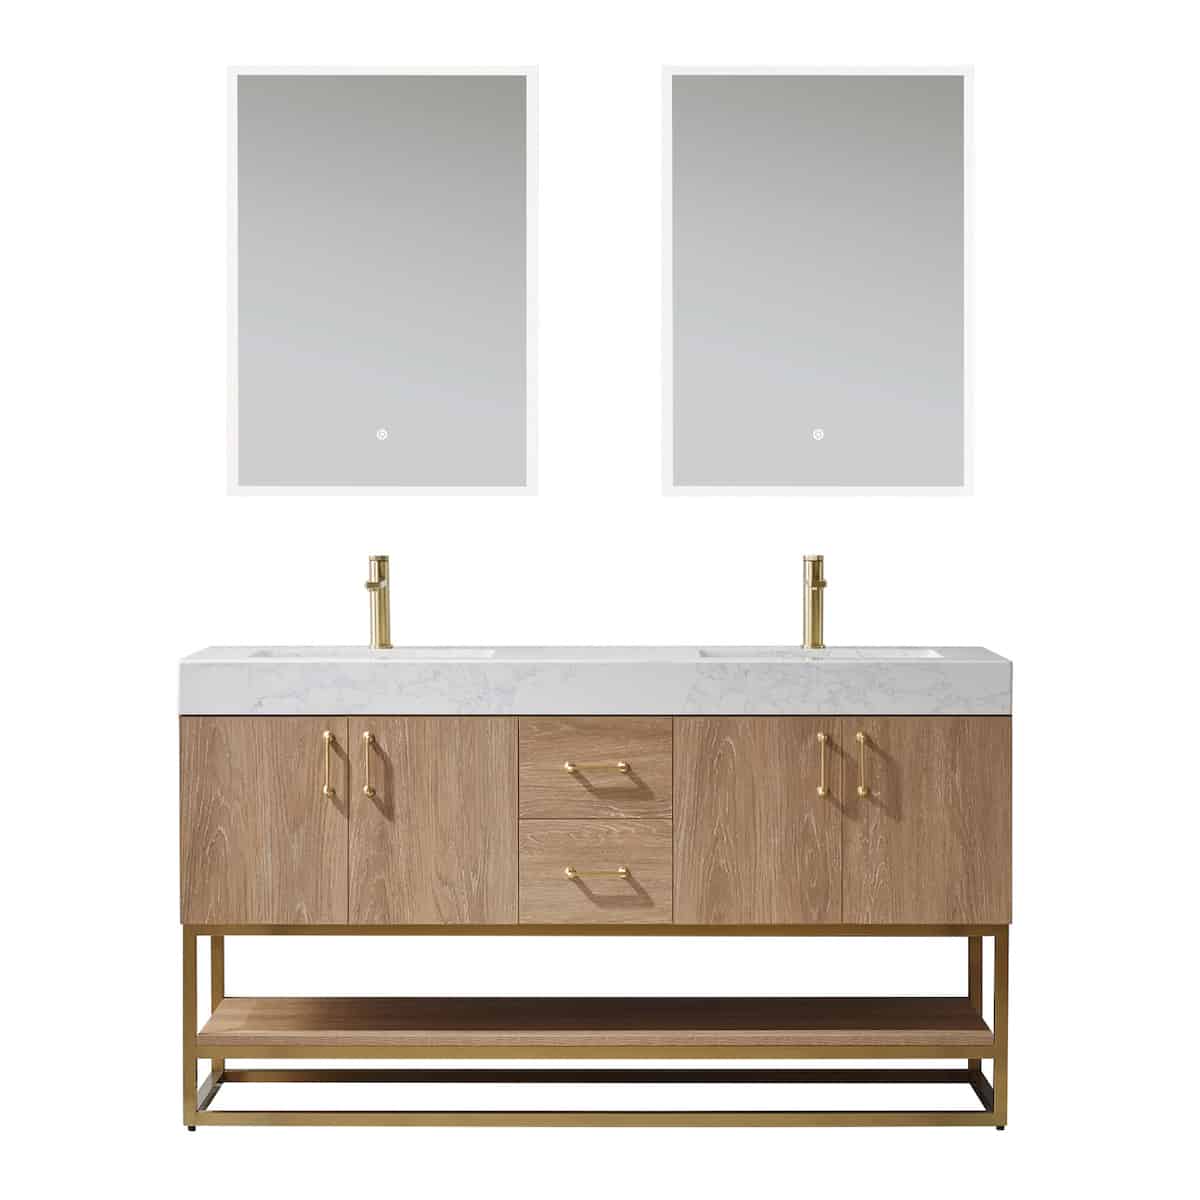 Vinnova Alistair 60 Inch Freestanding Double Vanity in North American Oak and Brushed Gold Frame with White Grain Stone Countertop With Mirrors 789060-NO-GW